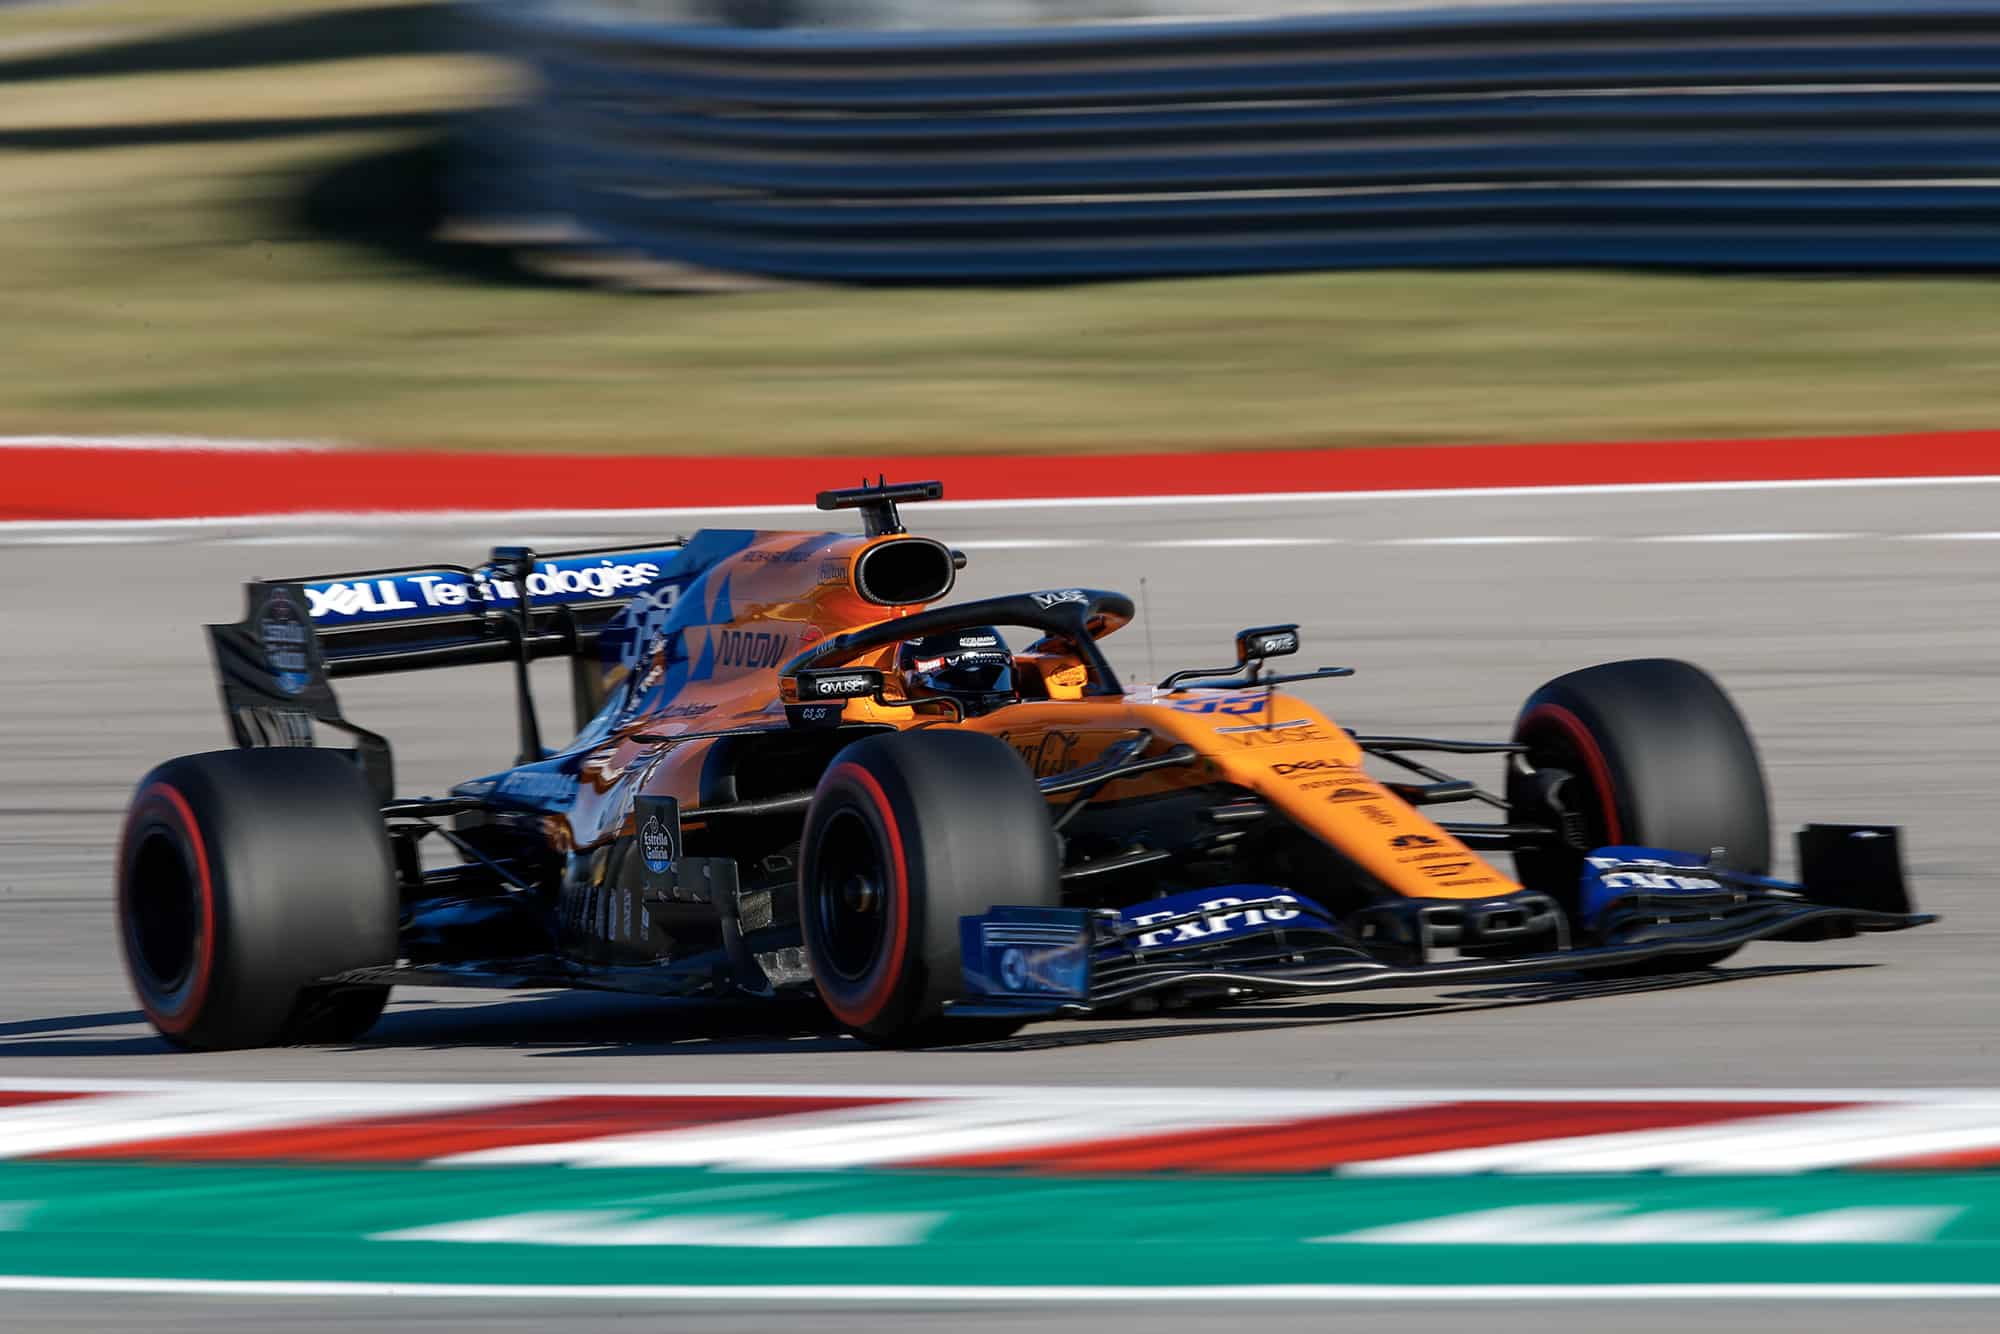 Carlos Sainz in his McLaren during qualifying for the 2019 United States Grand Prix